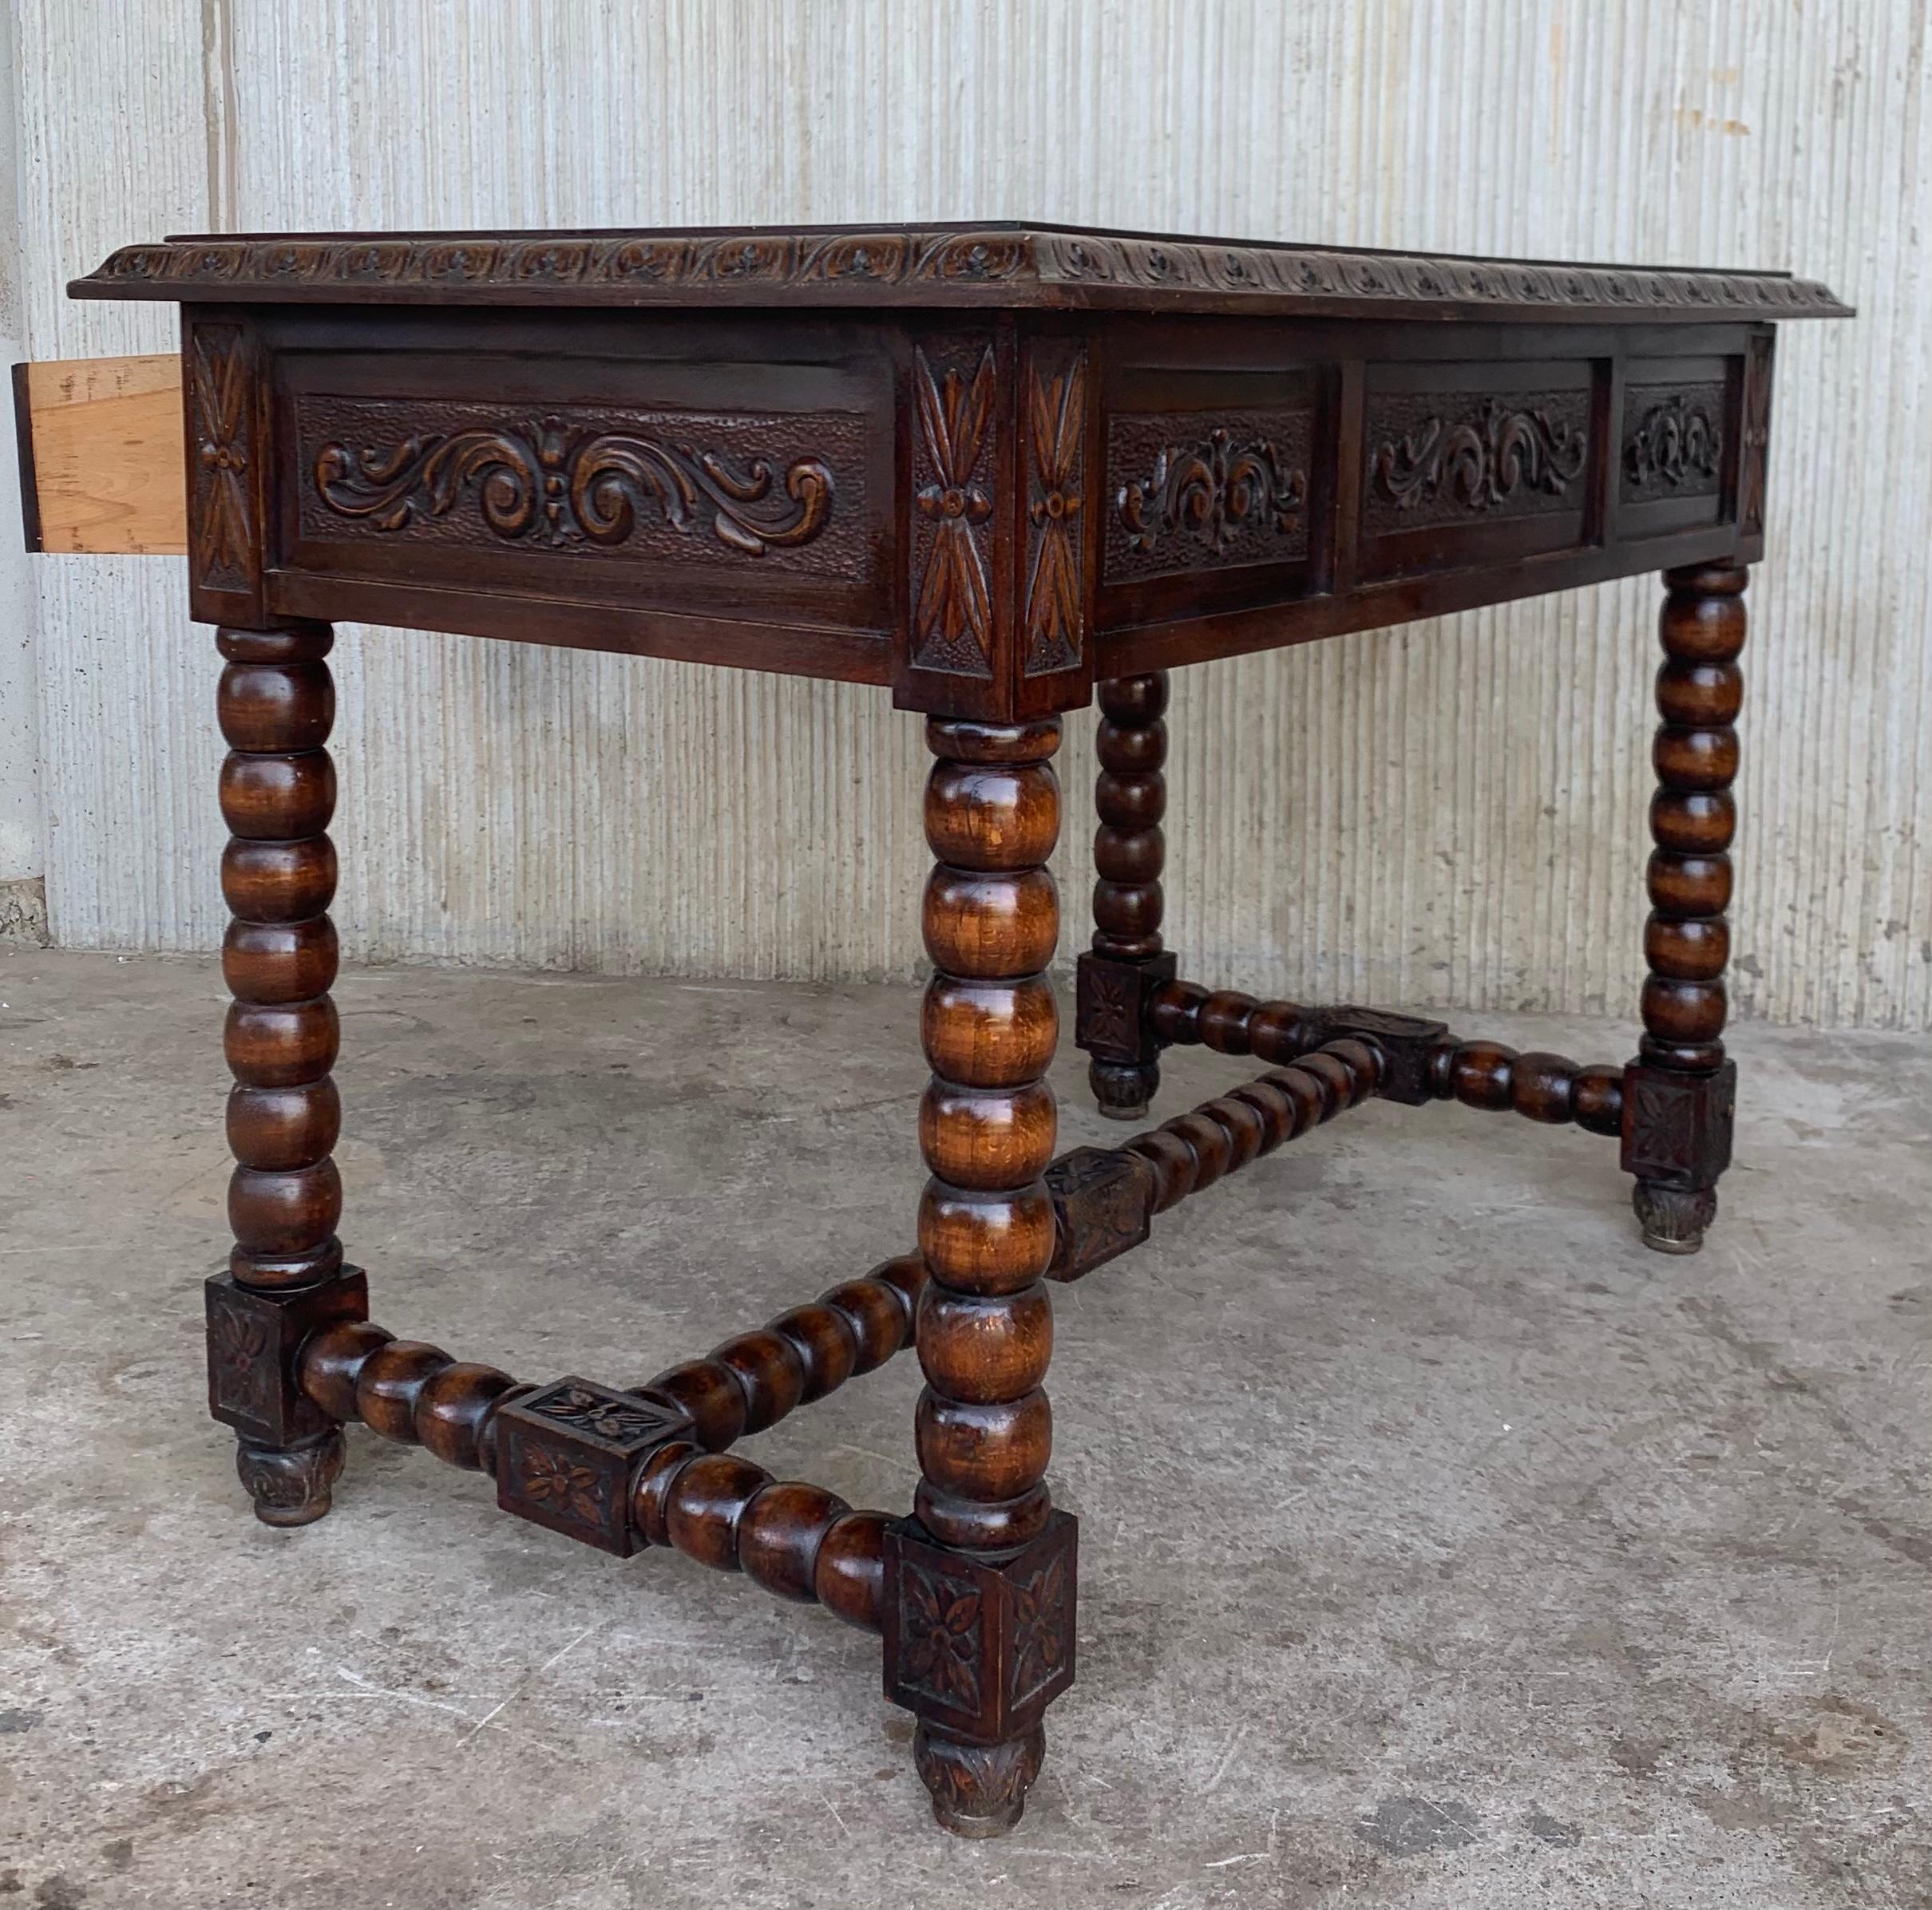 Handsome oak library piece that can be used as a desk or work table. Made of oak having carved gadrooned edges. A stretcher made of wood. Carved on all sides and three drawers, Early 20th century.
Workable locks and key.

Measures: Height to the